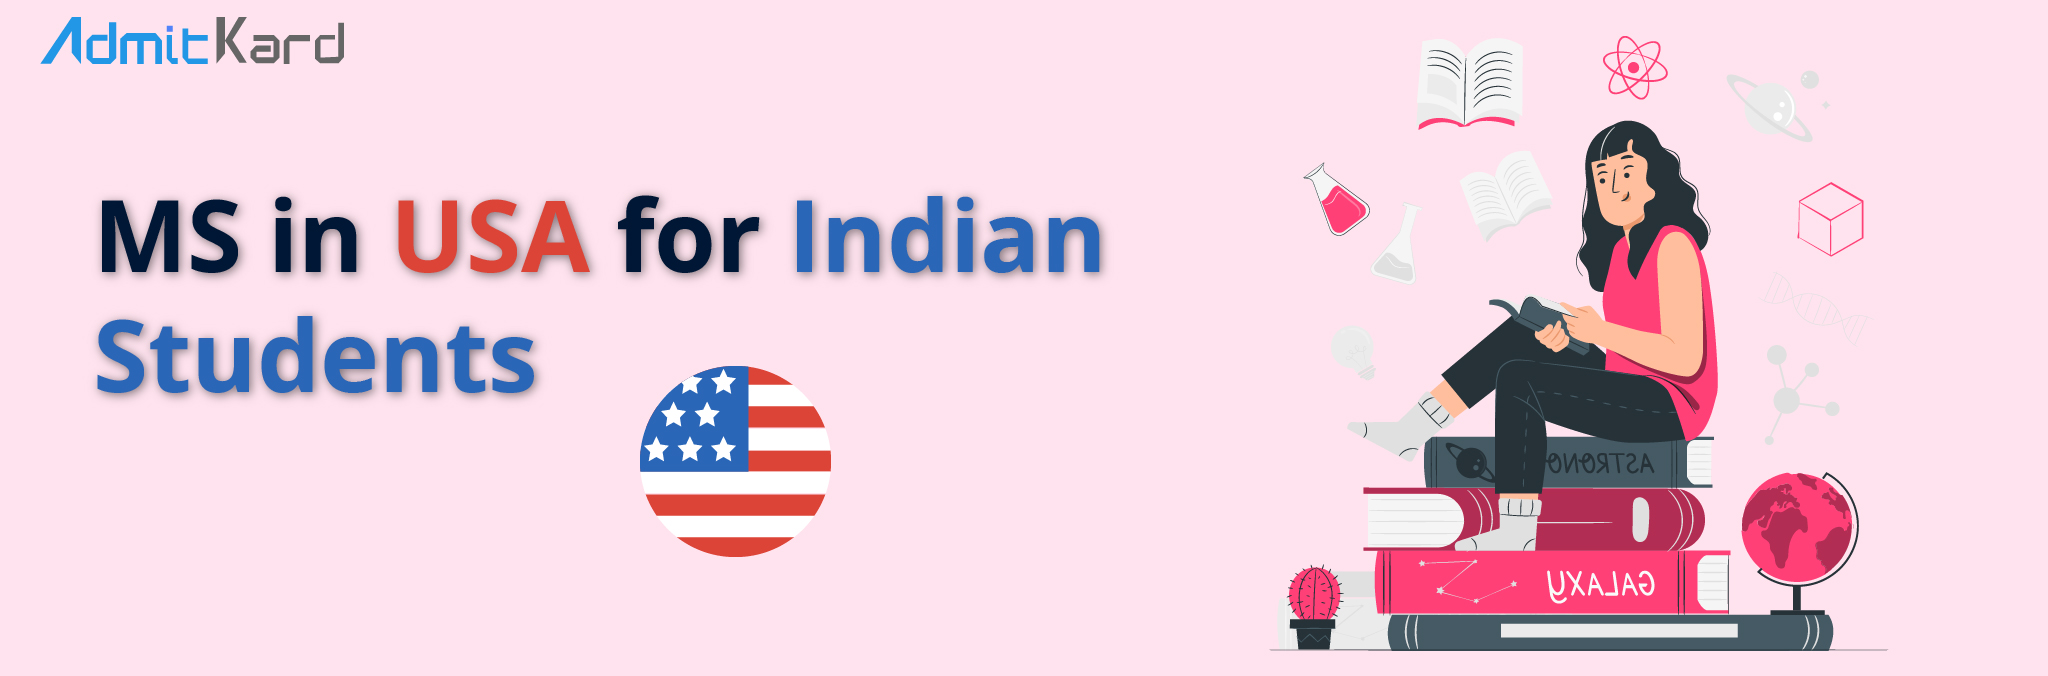 ms in usa for indian